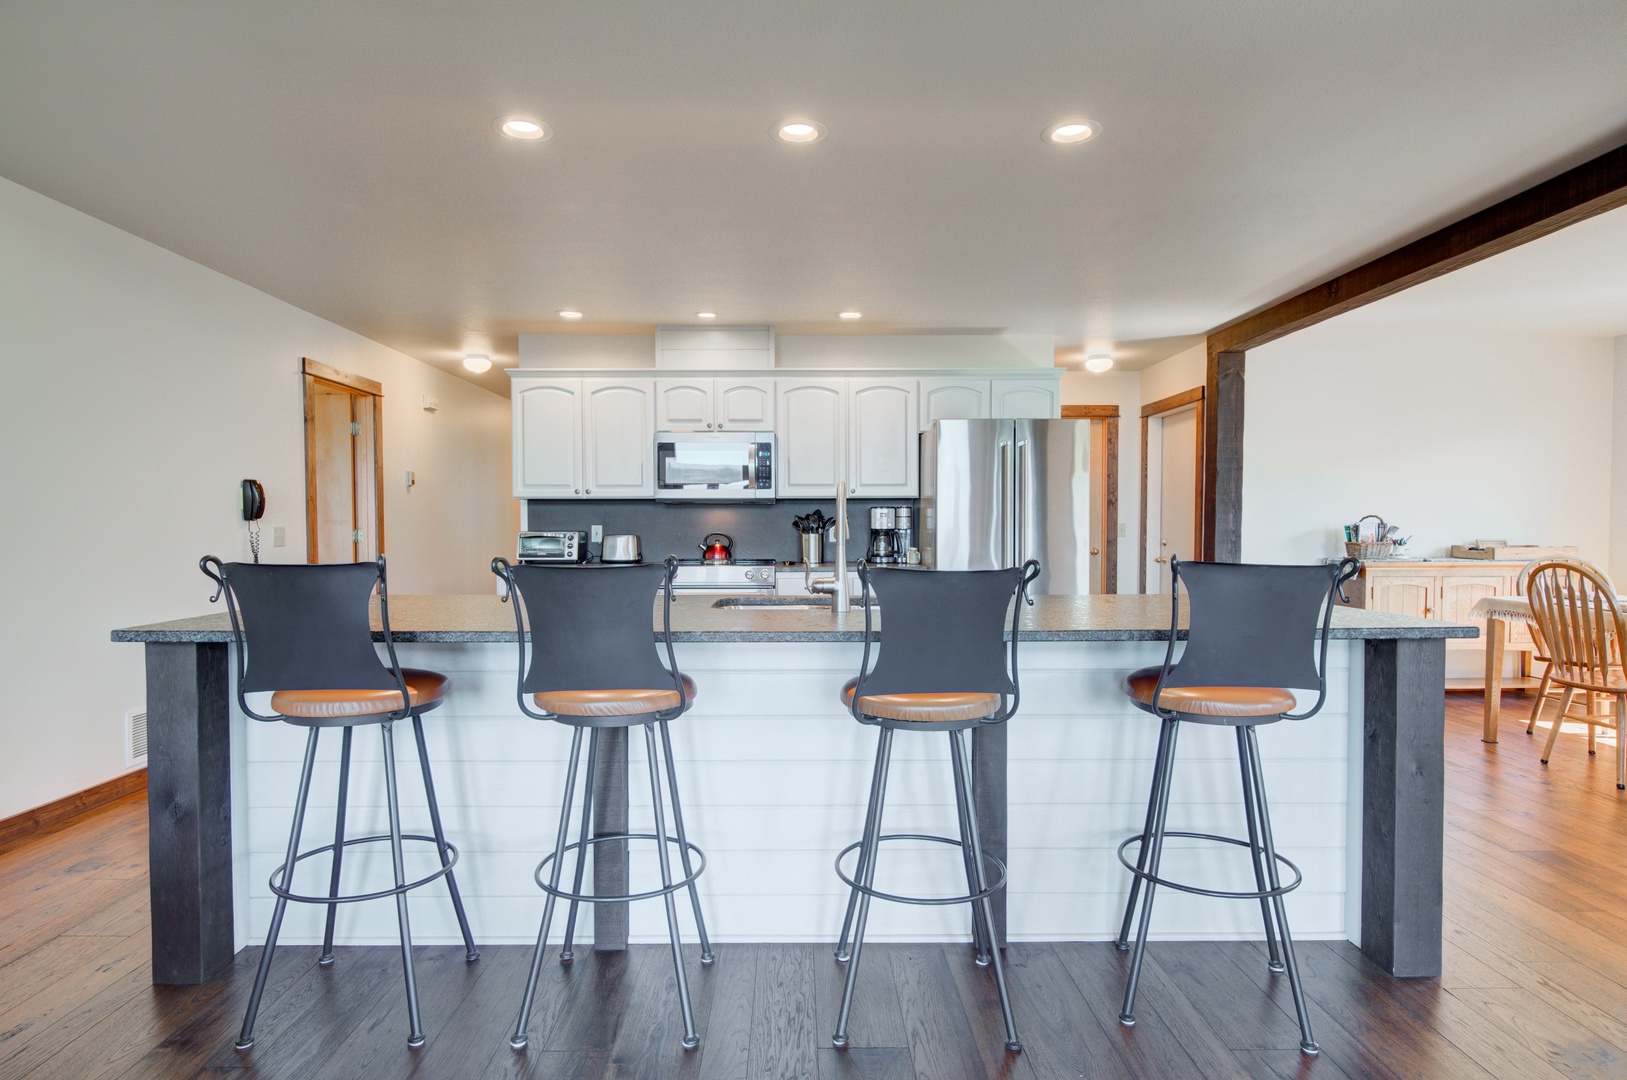 Bozeman Vacation Rentals, The Canyon Lookout - Open kitchen views